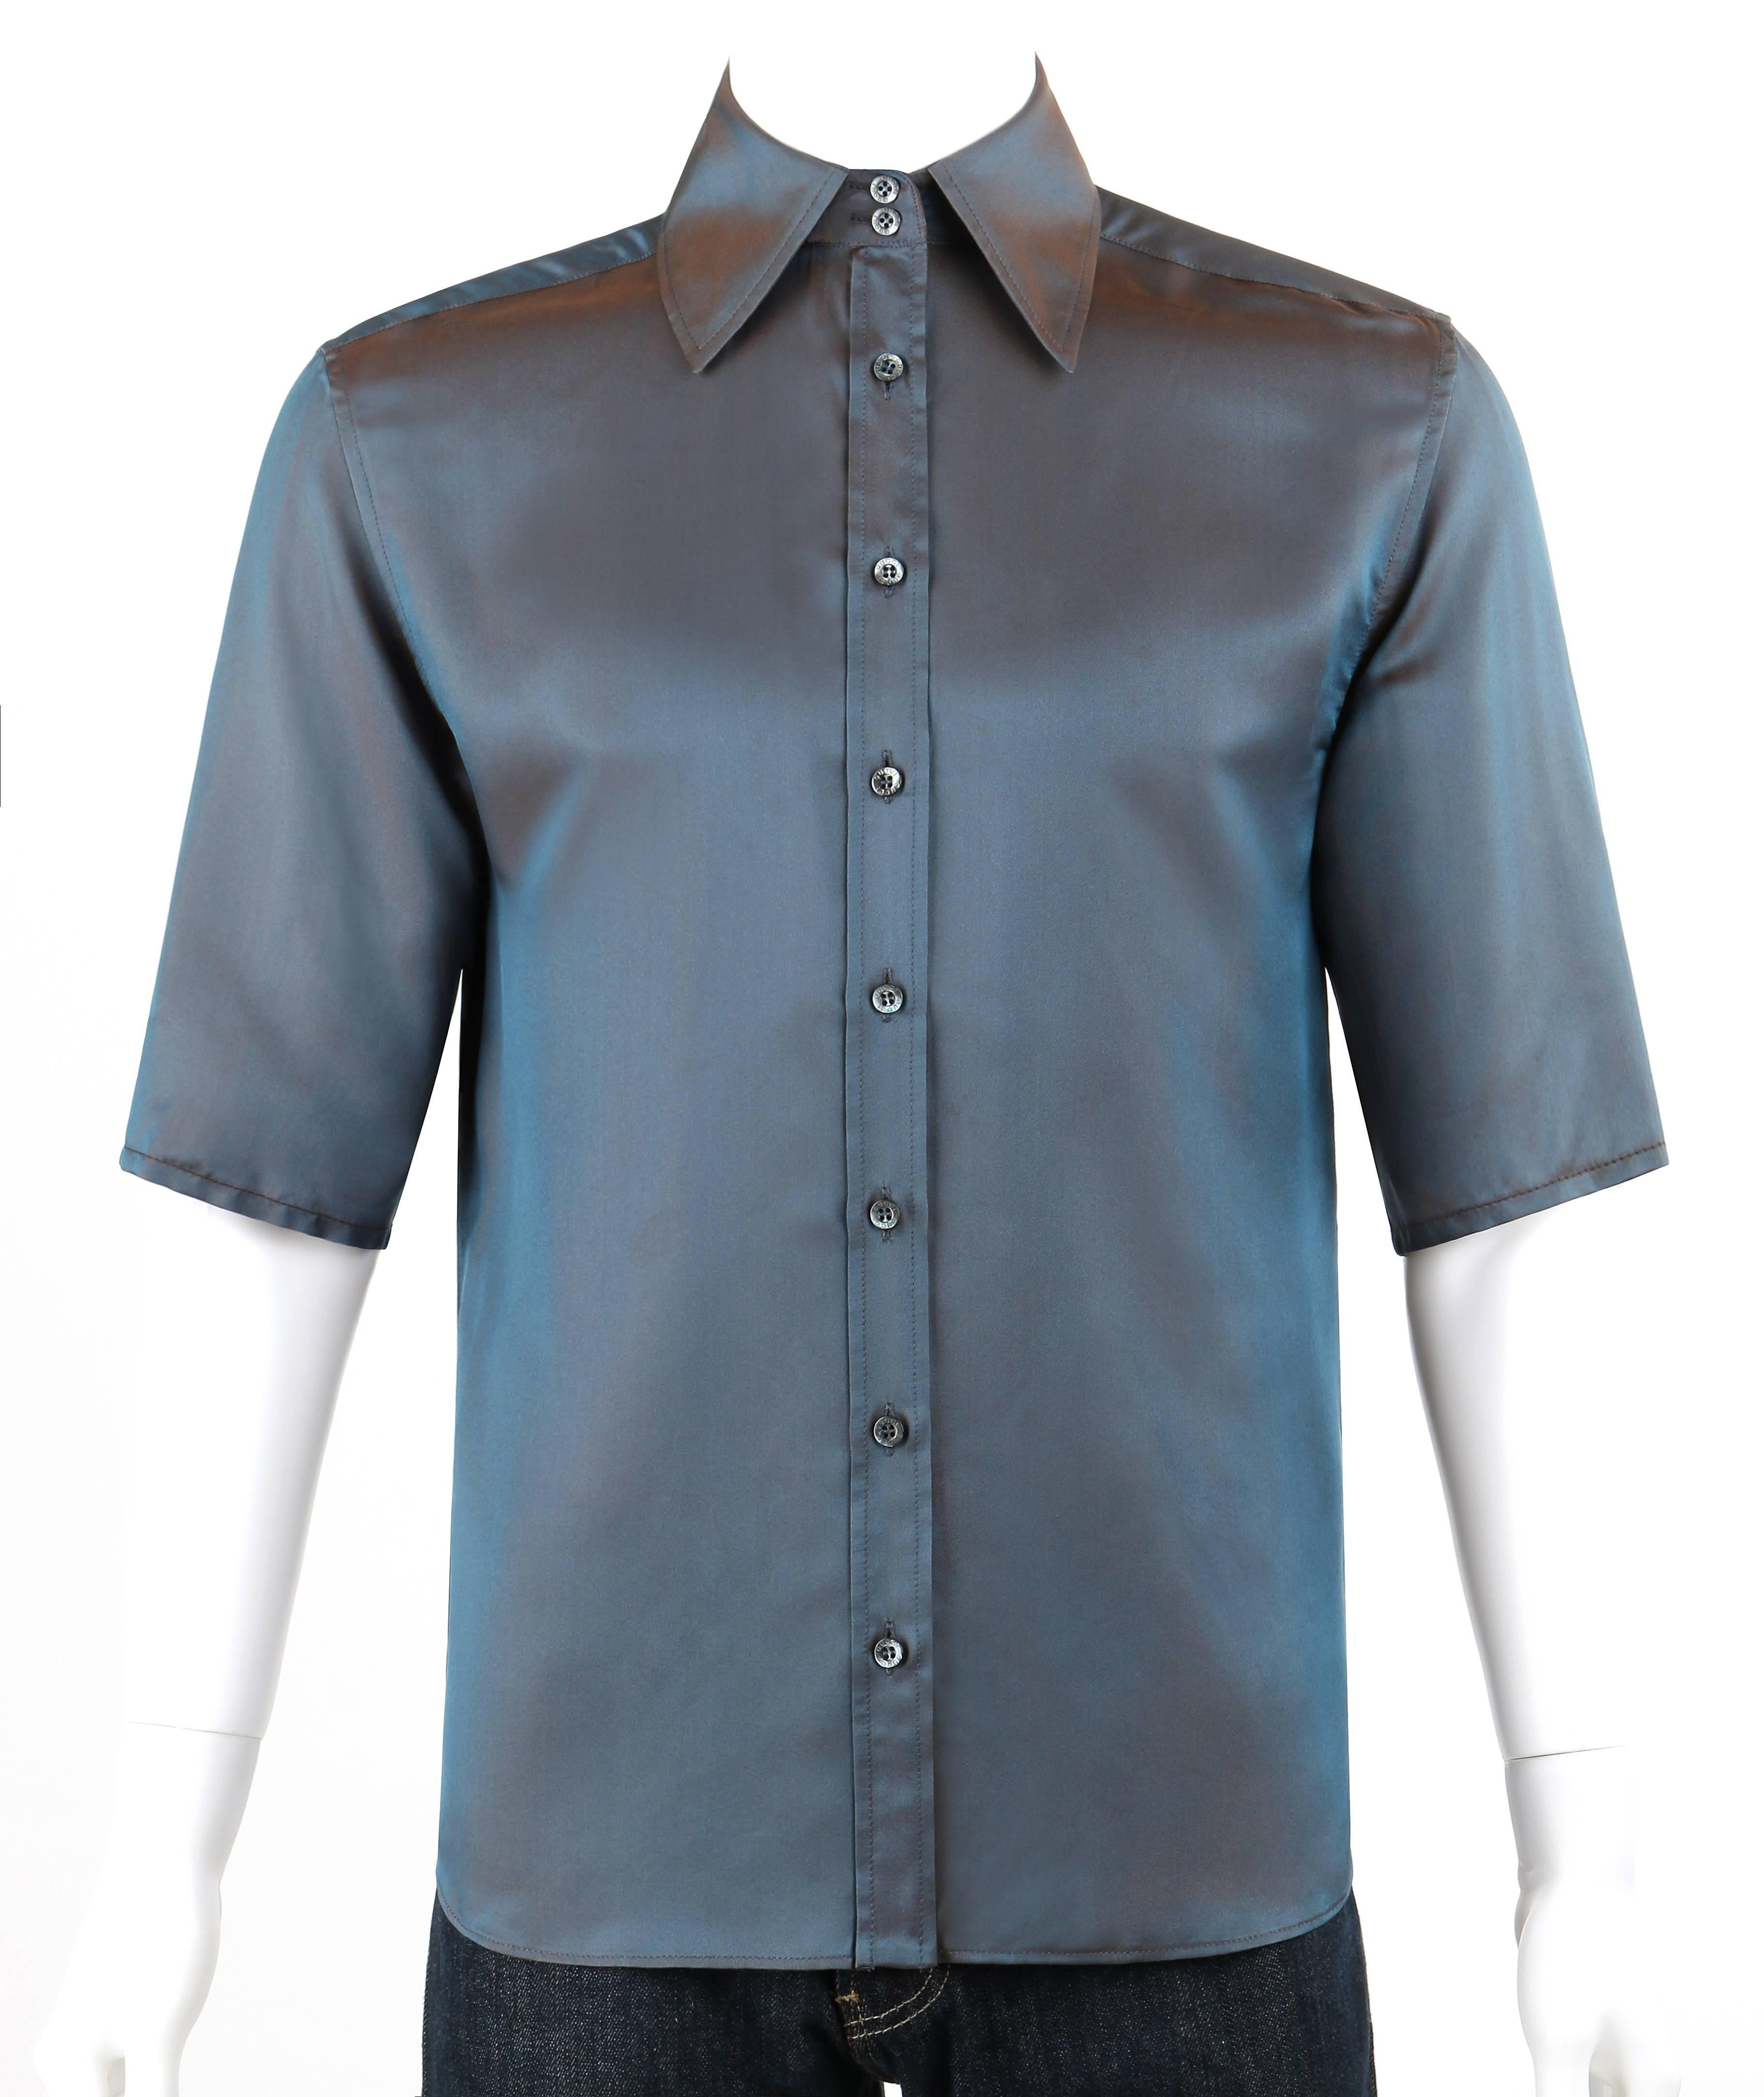 Gucci Spring/Summer 1998 Teal blue & brown iridescent silk blend shirt designed by Tom Ford. Short sleeve button down shirt. Nine center front button closures. Shirt collar with stays. Back yoke with two knife pleats. Marked Fabric Content: